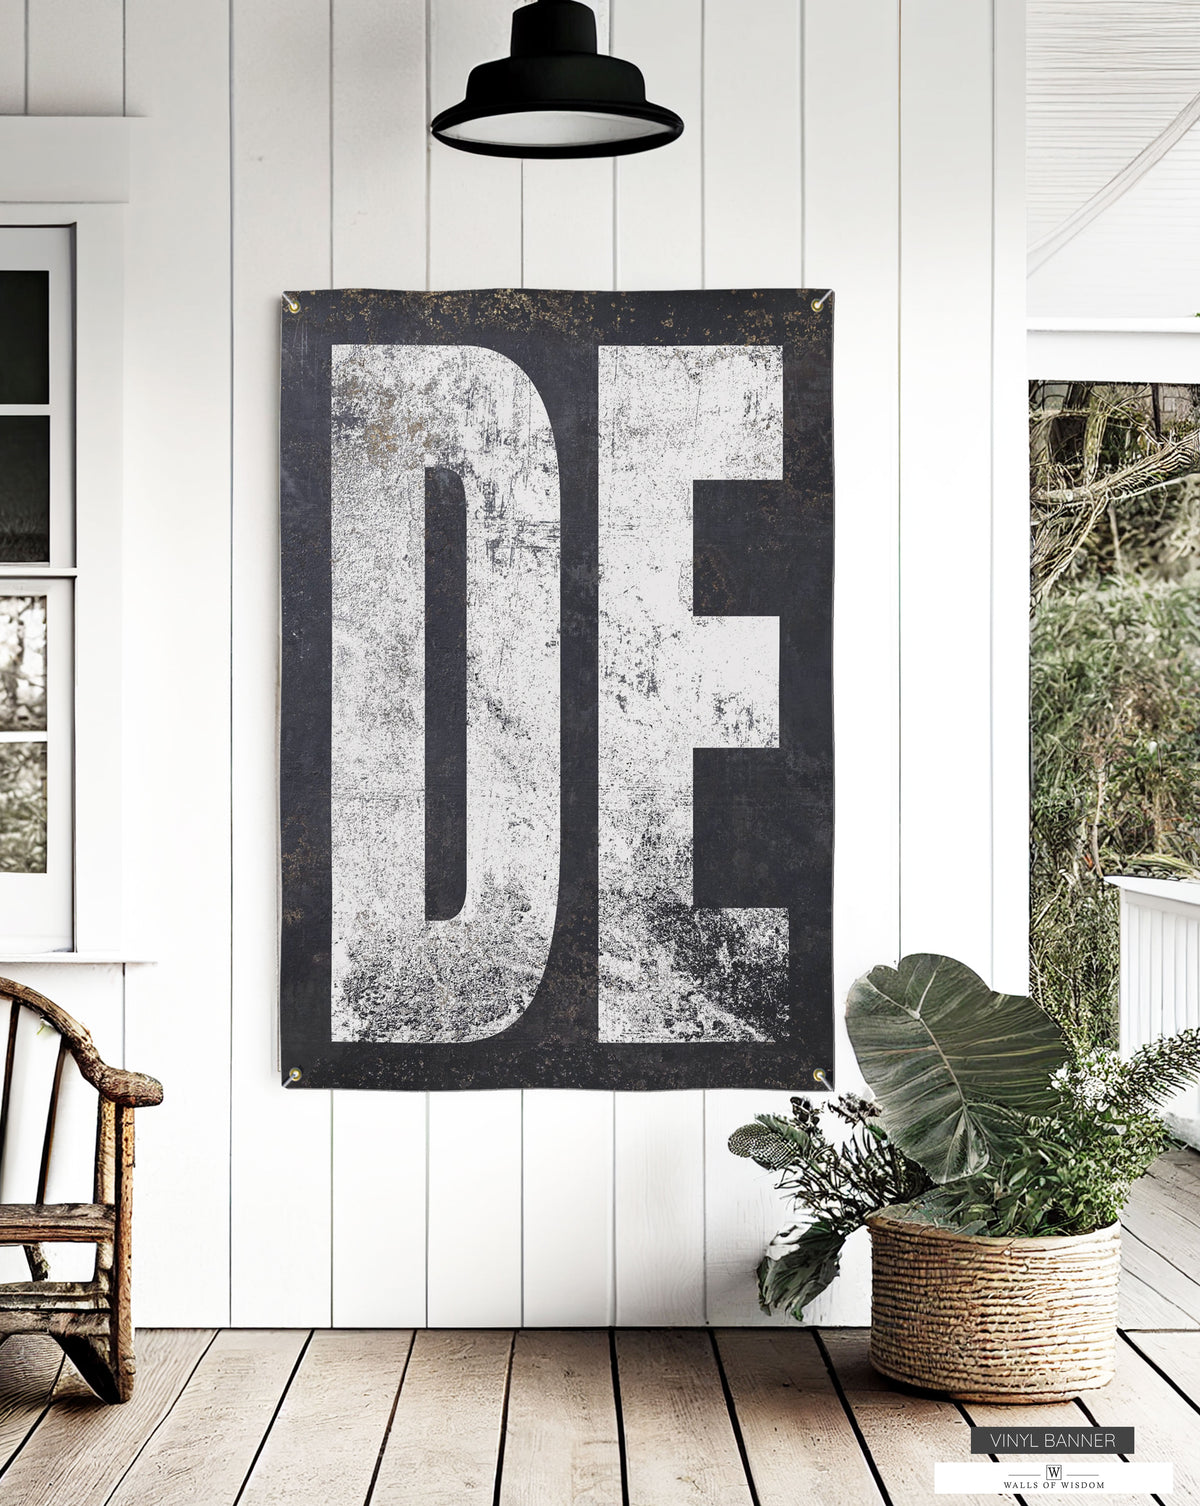 Enhance Patios and Gardens with Delaware's Coastal Beauty - Durable Outdoor Art